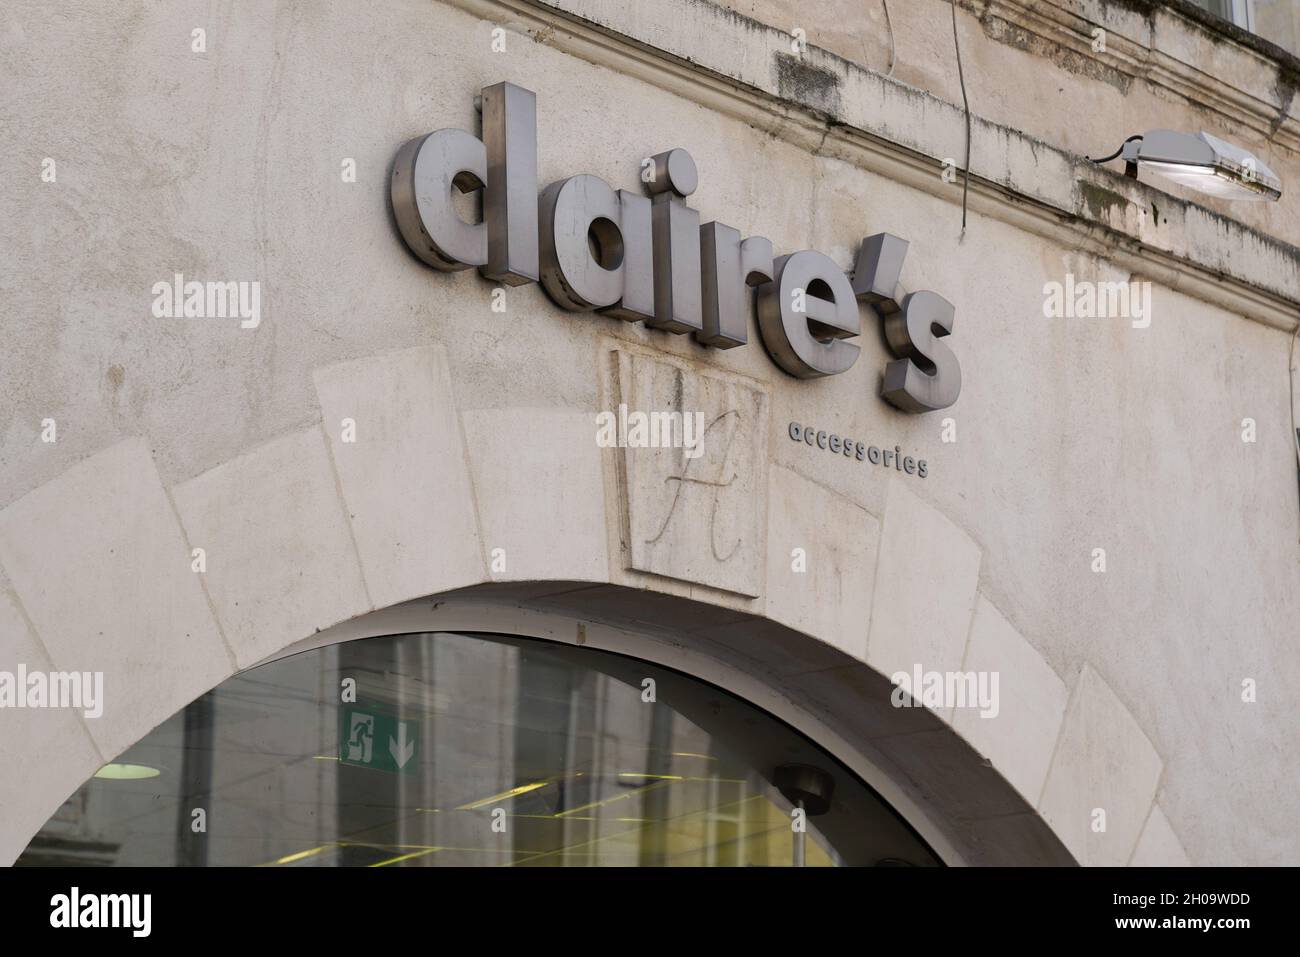 toulouse , occitanie France  - 06 25 2021 : claire's sign text store and logo brand shop on facade boutique Stock Photo